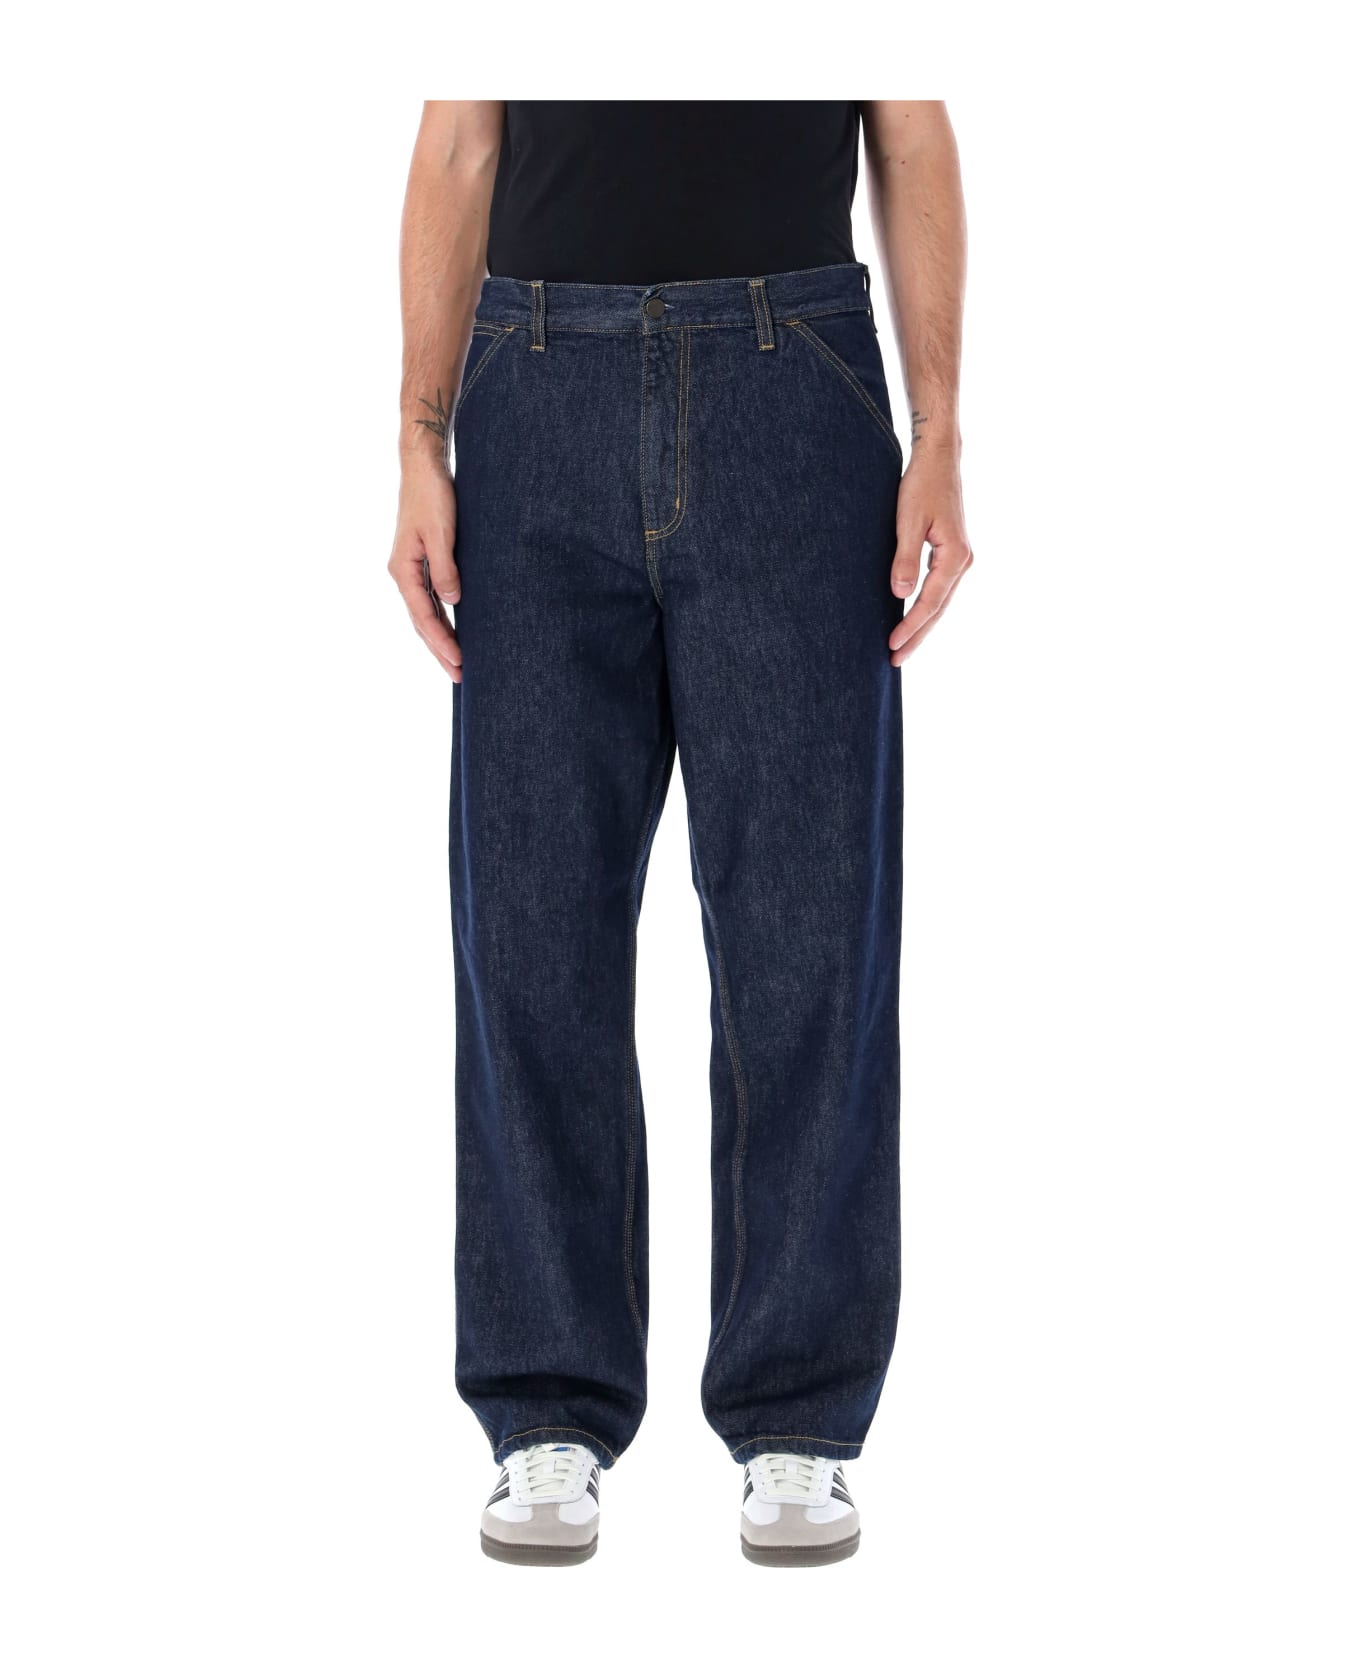 Carhartt Single Knee Jeans - BLUE STONE BLITCHED